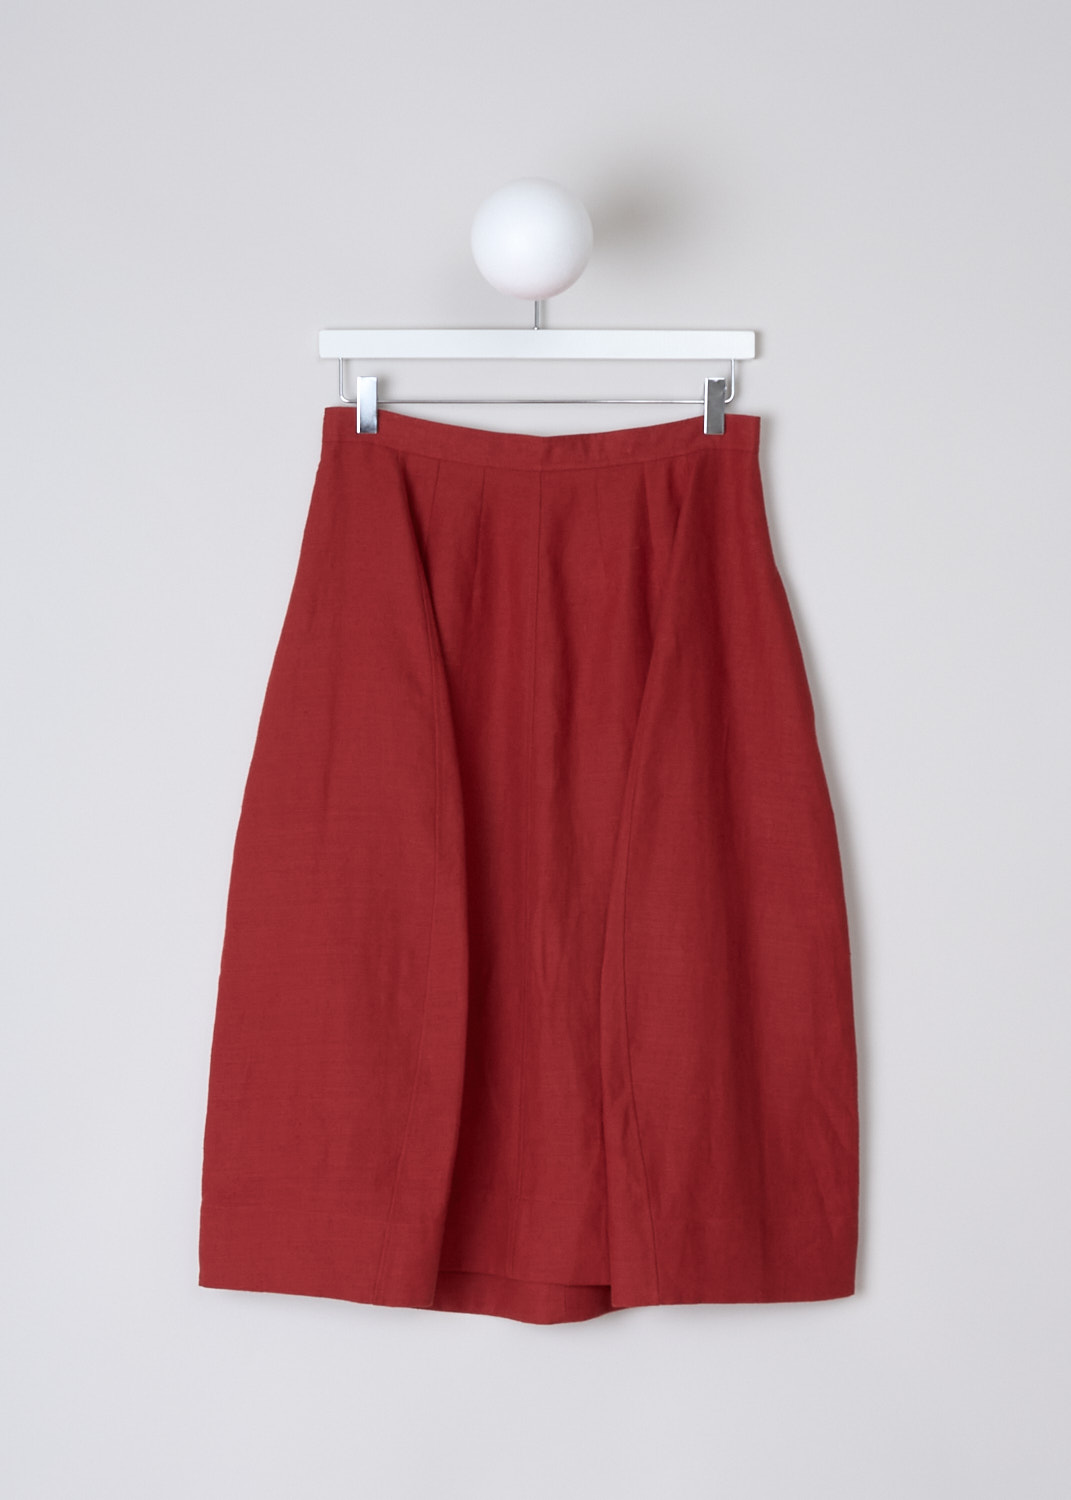 CHLOÉ, LINEN A-LINE SKIRT IN PEPPERY RED, CHC23UJU08030649_PEPPERY_RED, Red, Front, This Peppery Red linen midi skirt has a wide A-line silhouette. The skirt has a narrow waistband. Concealed slanted pockets can be found in the side seam. In the back, a concealed centre zip functions as the closure. The skirt has a straight hemline. 
